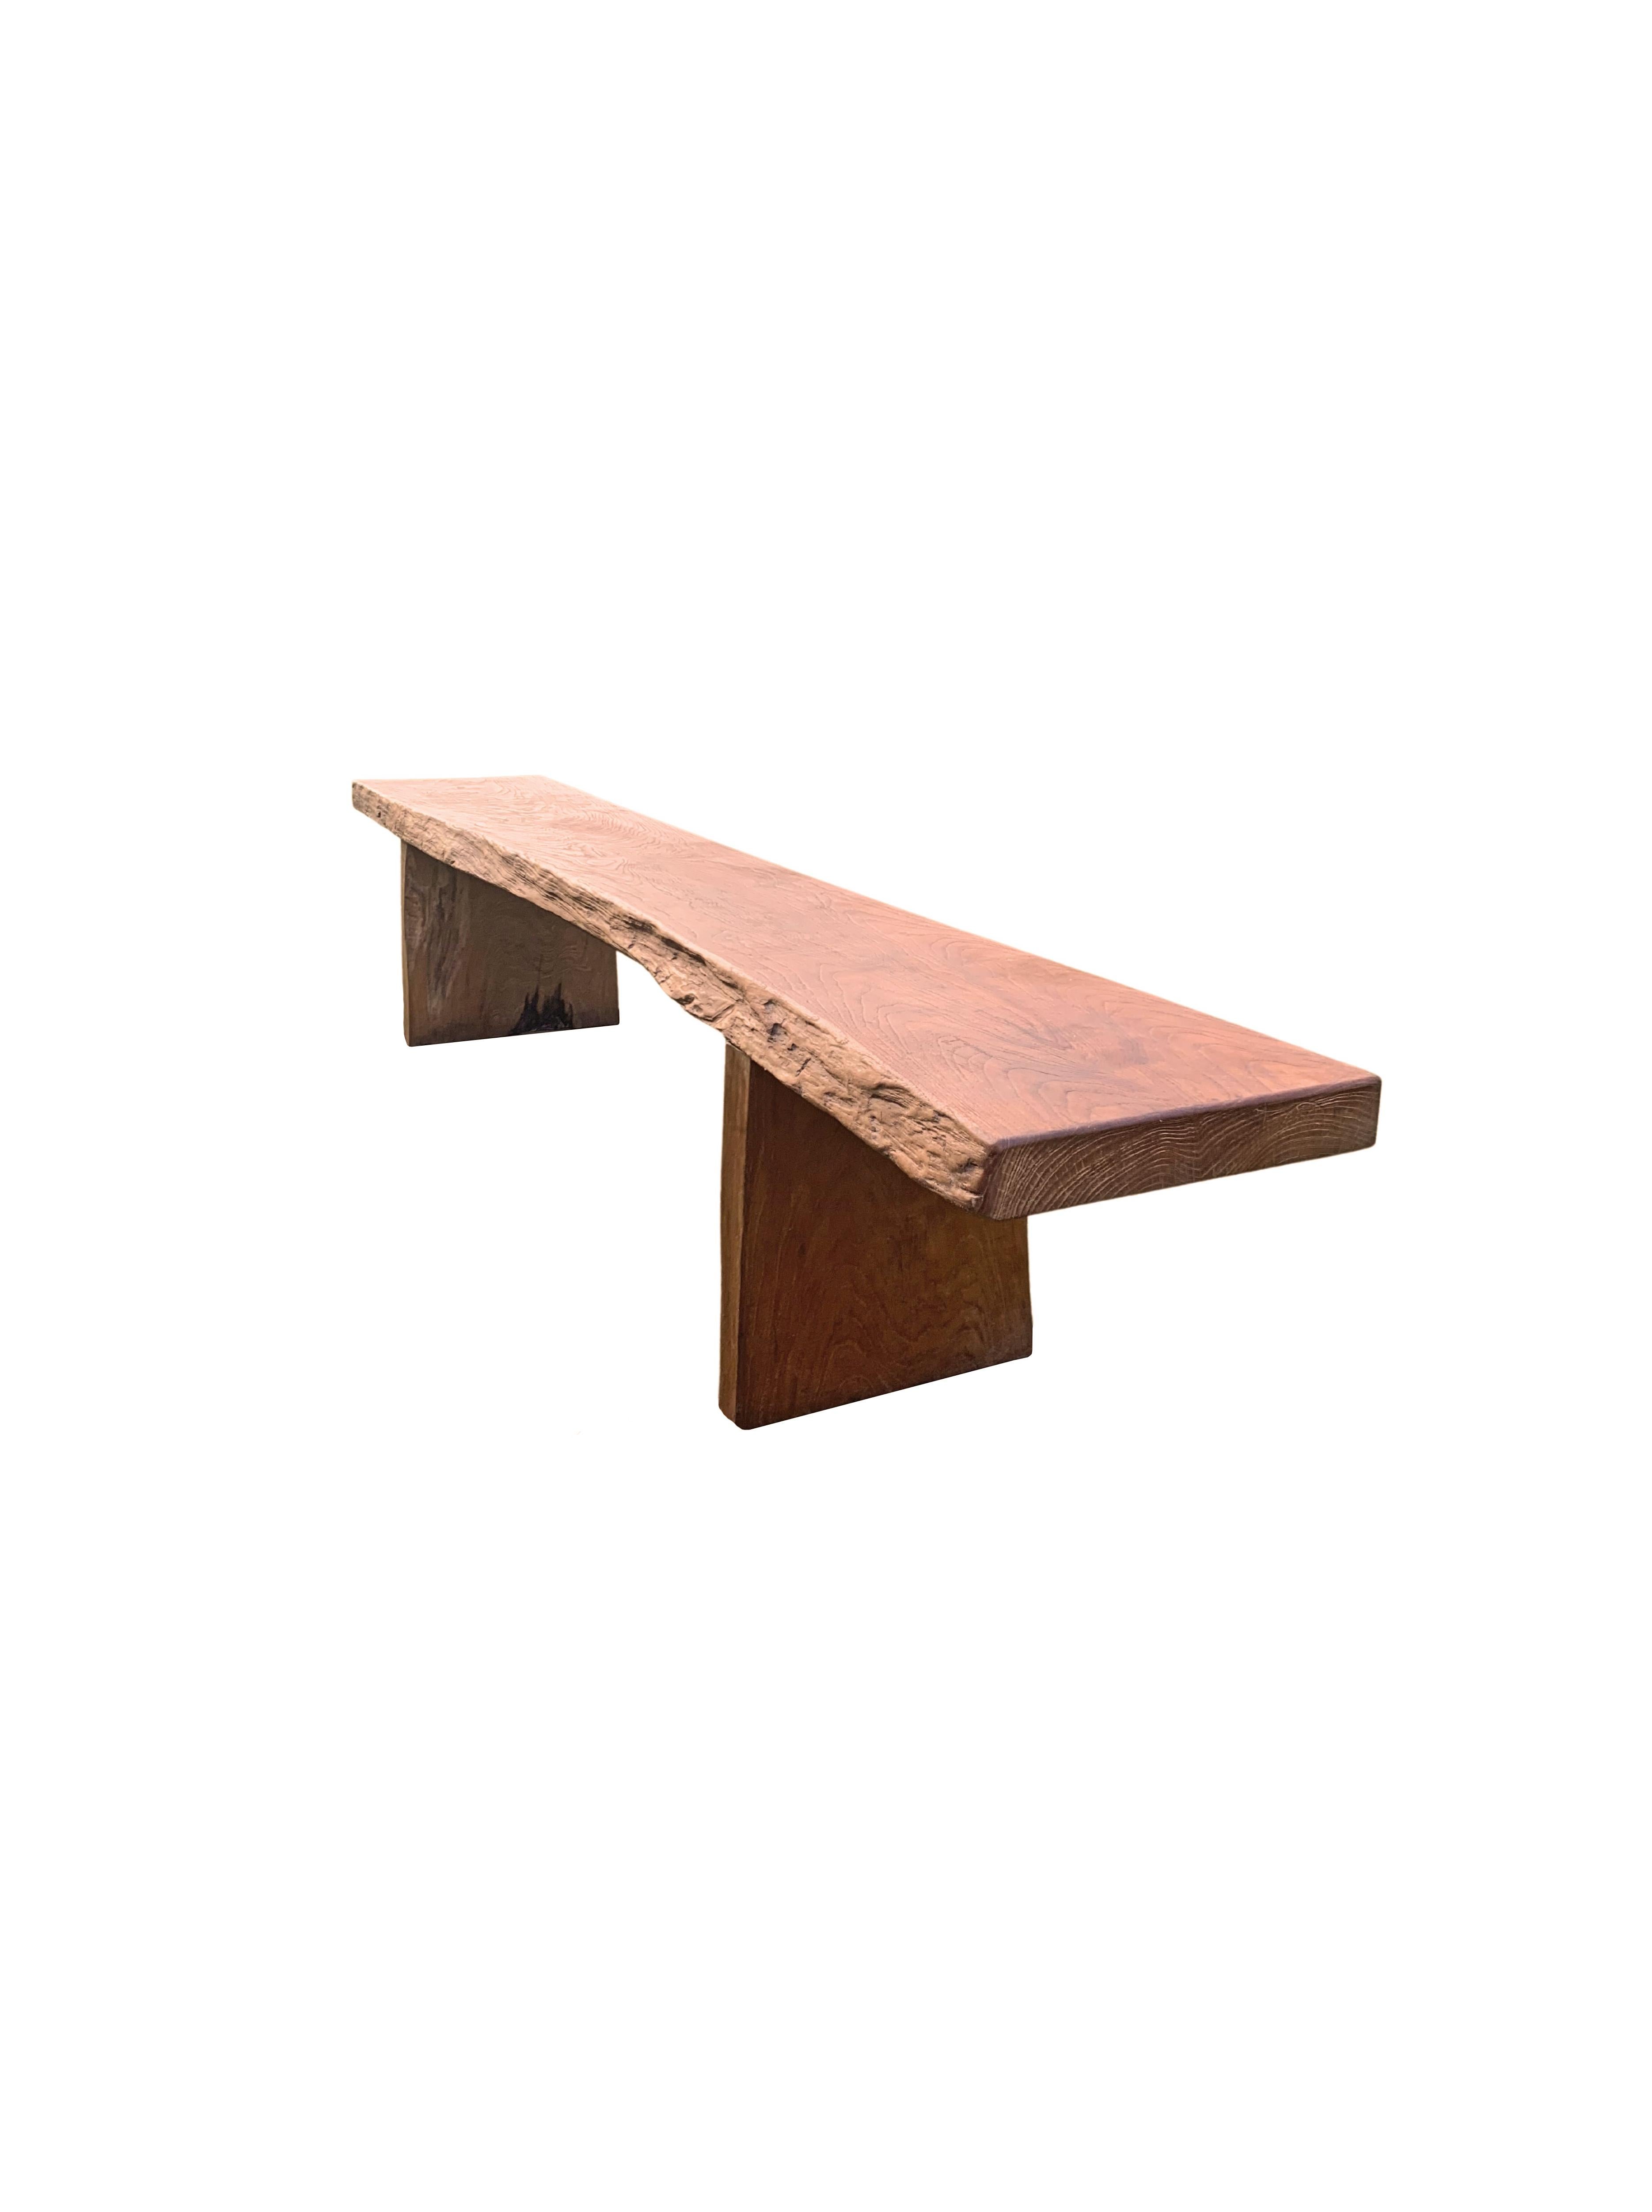 Hand-Carved Solid Teak Wood Long Bench Modern Organic For Sale